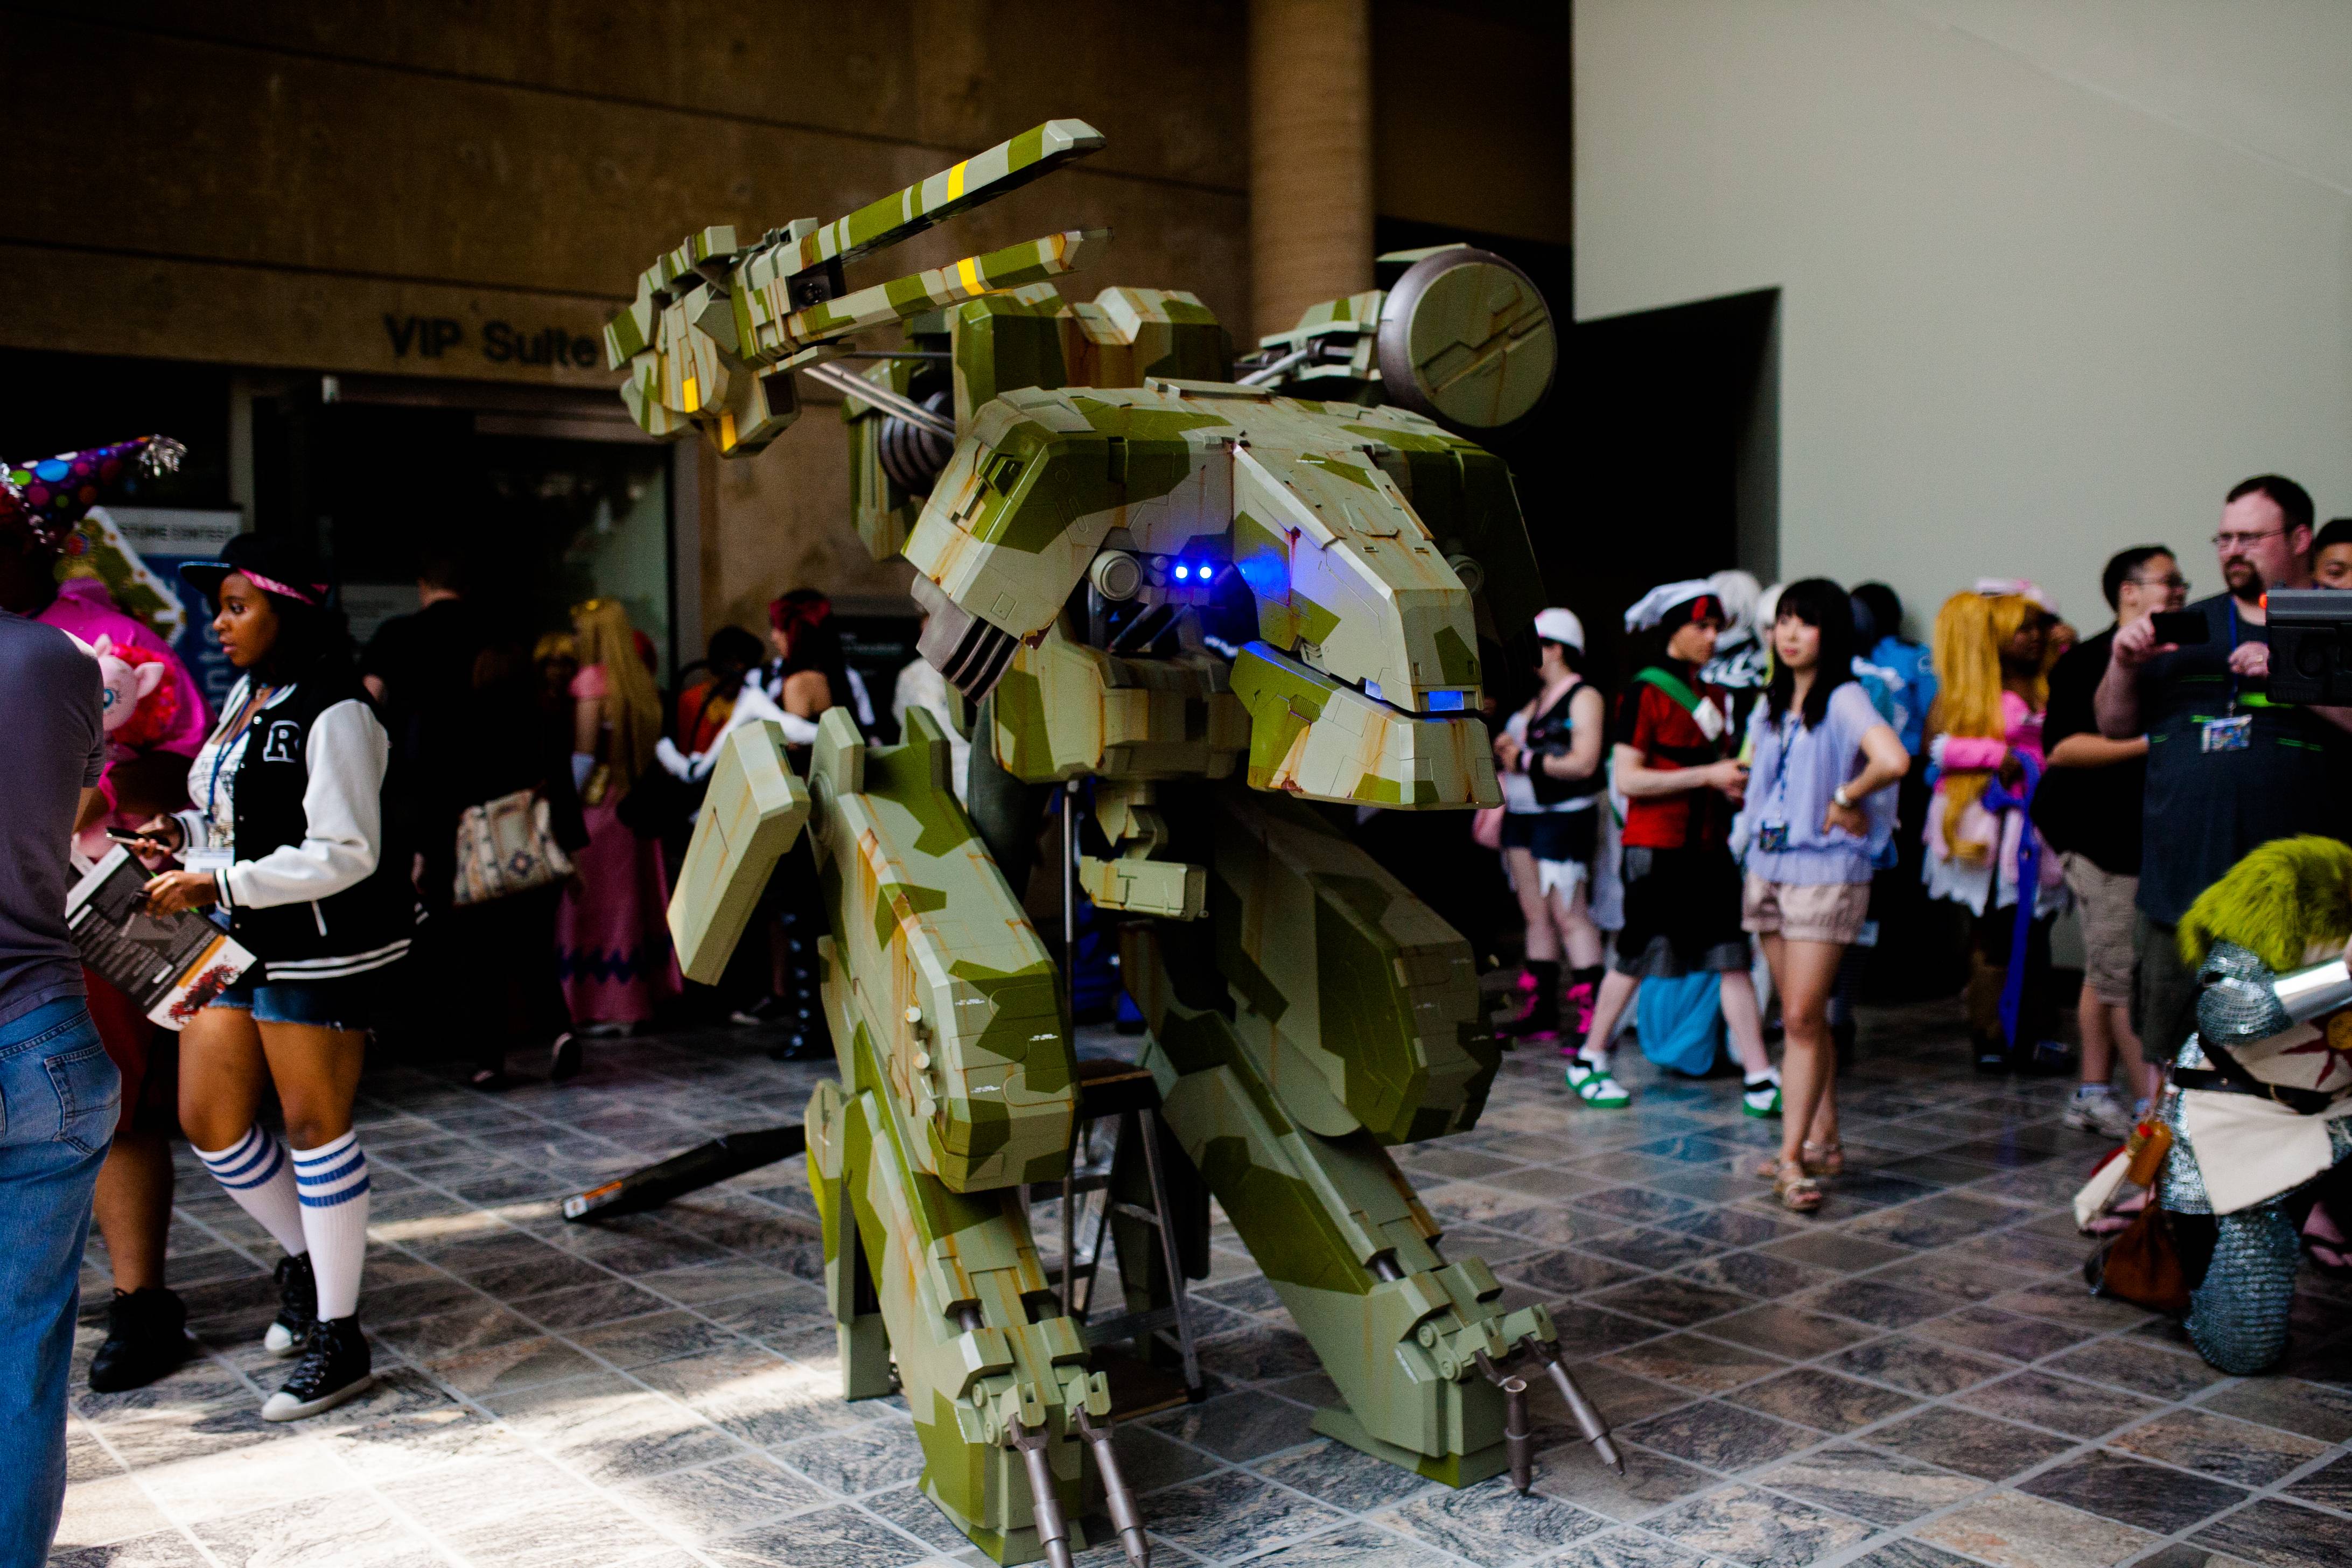 Image for You have to see this mind-blowing Metal Gear REX cosplay